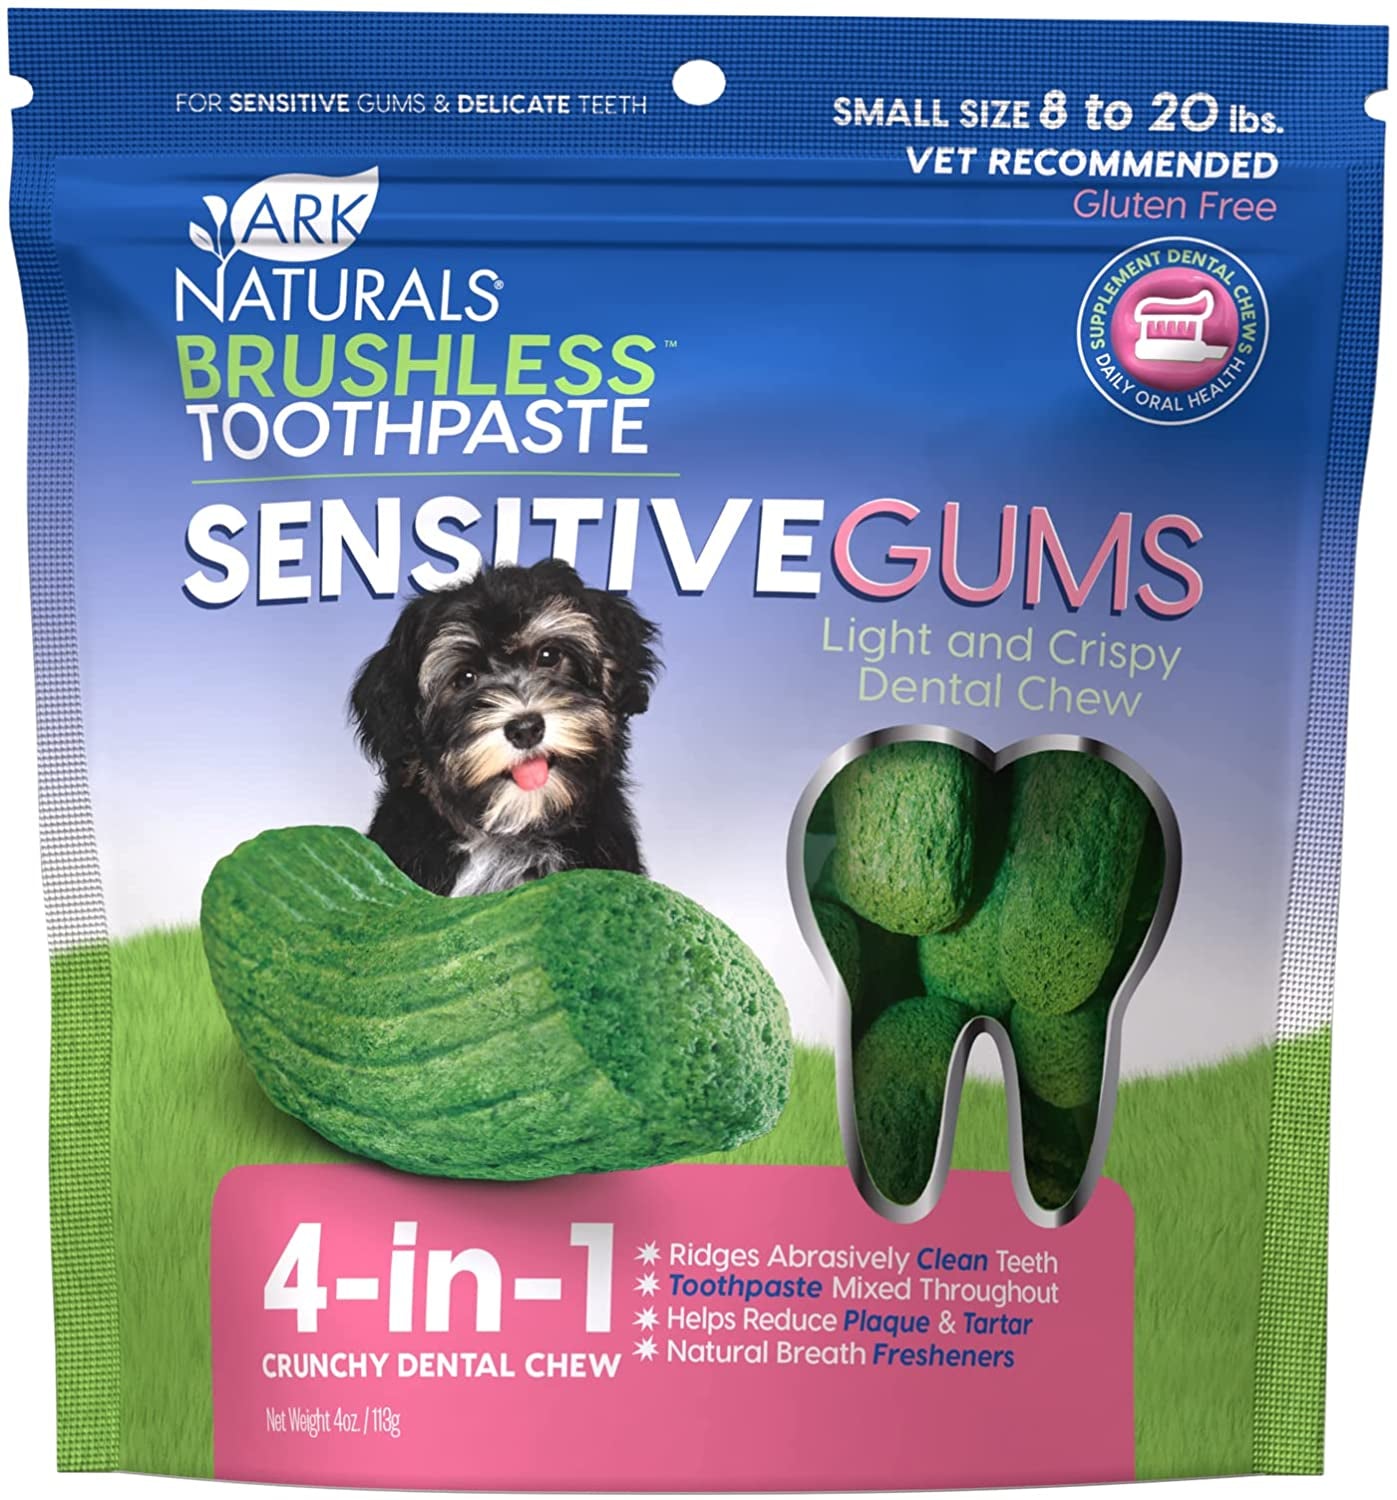 "Fresh Breath Dental Chews for Small Dogs - Vet Recommended Solution for Sensitive Gums, Plaque & Tartar Control"